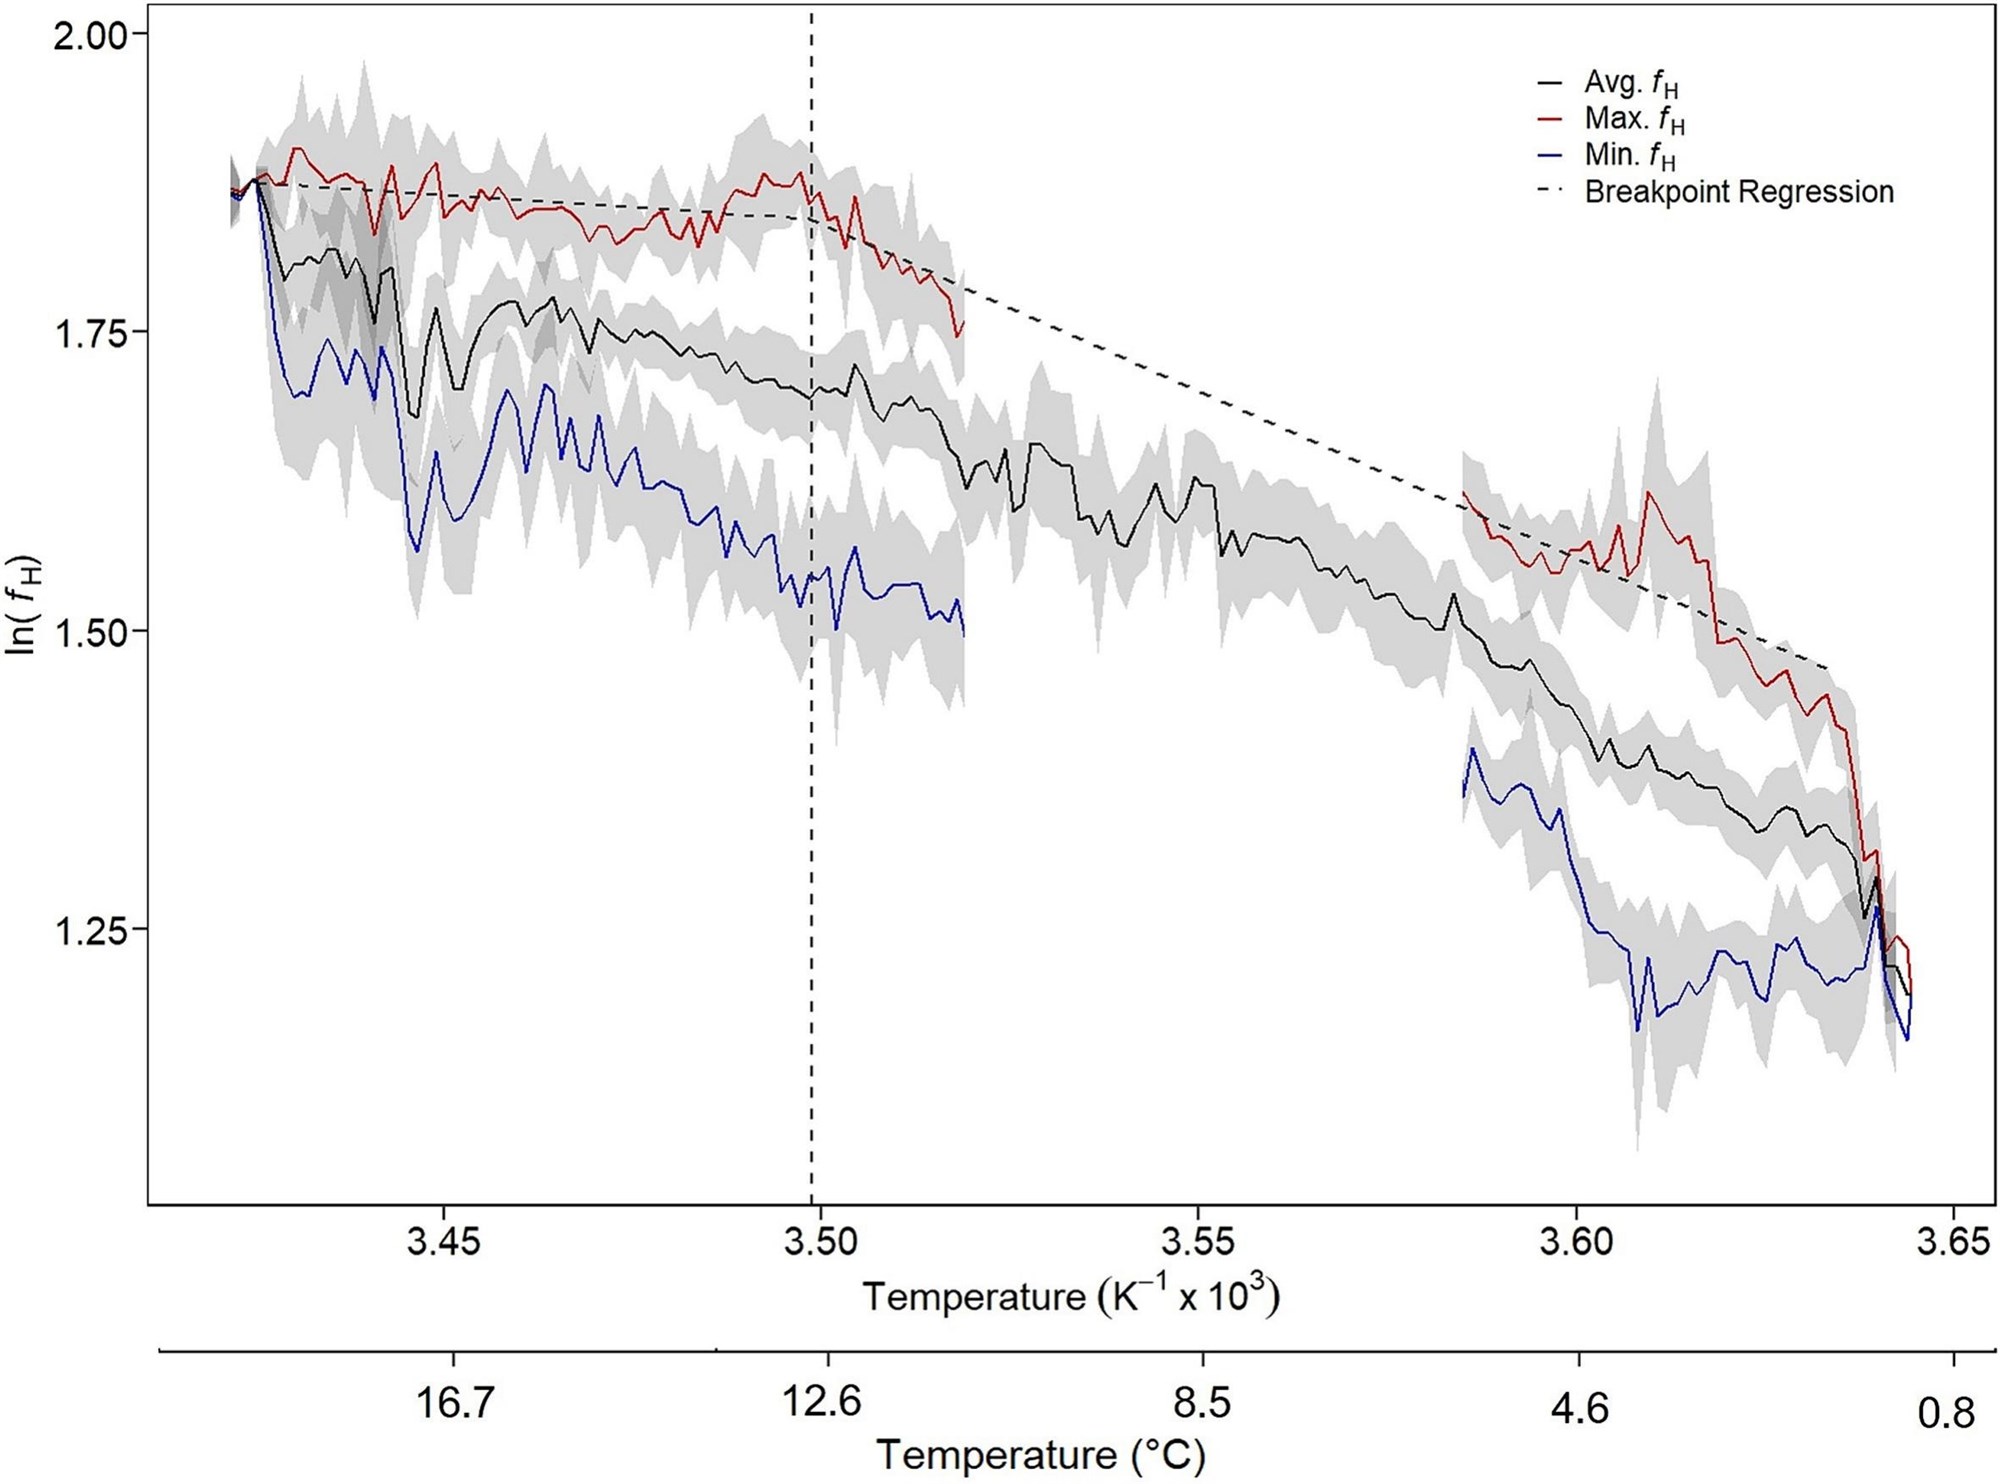 Fig. 6. Arrhenius plot for maximum, minimum, and average heart rate over the full range of observed temperatures. Dashed lines are the piecewise regression analysis and mark the estimated breakpoint at 12.7 °C, indicating Topt.